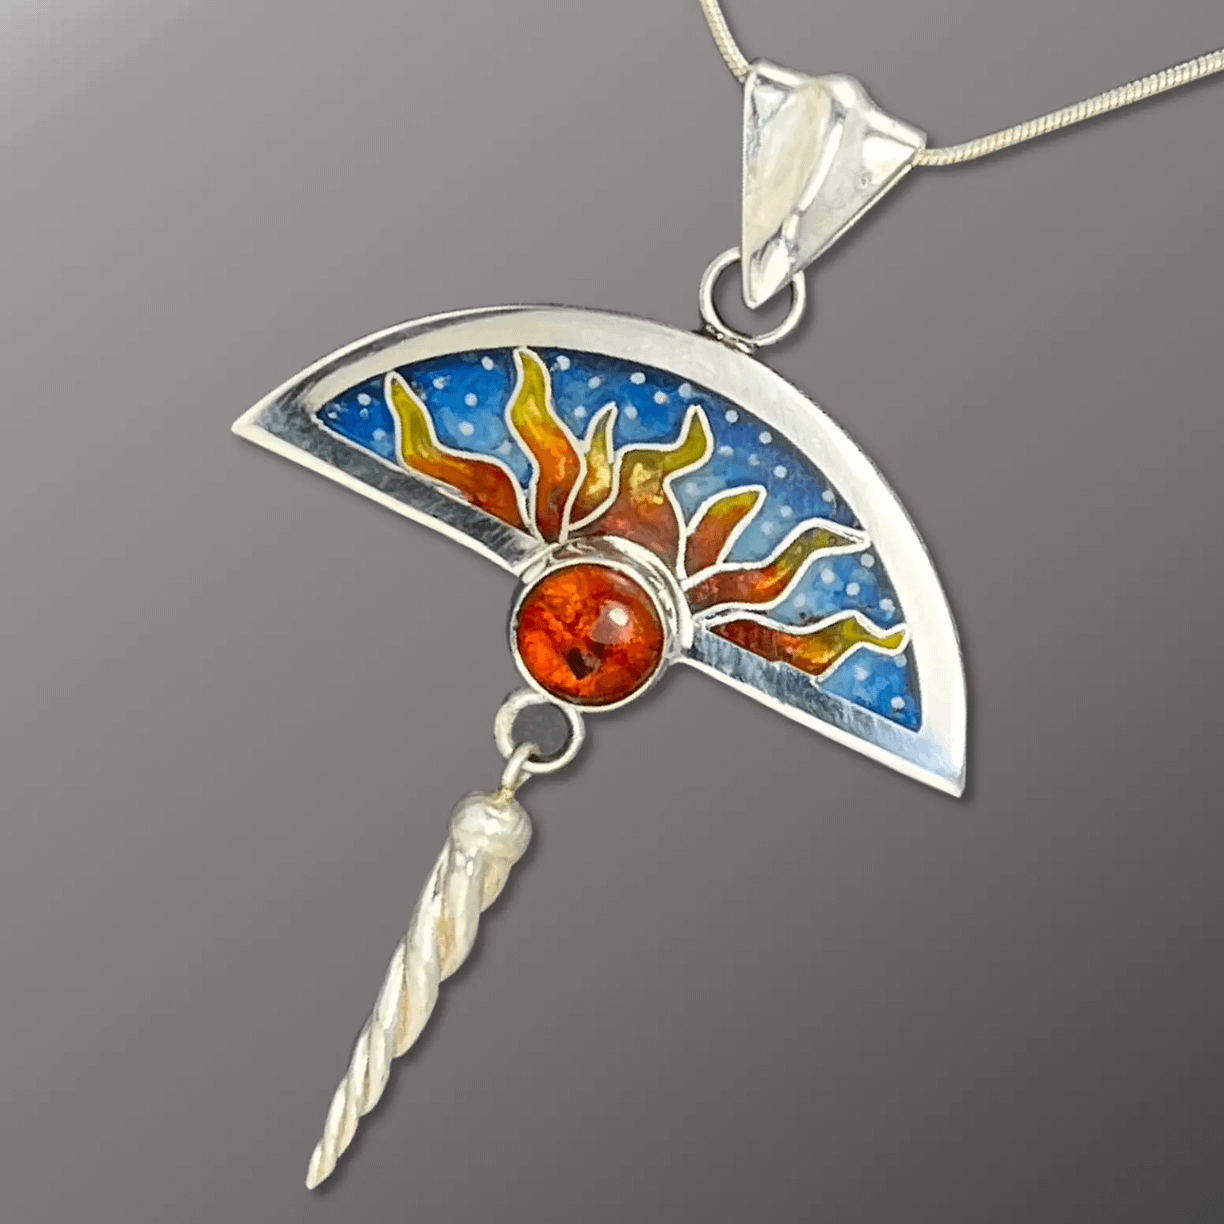 Resinate Cloisonne Pendant by Tracey Spurgin